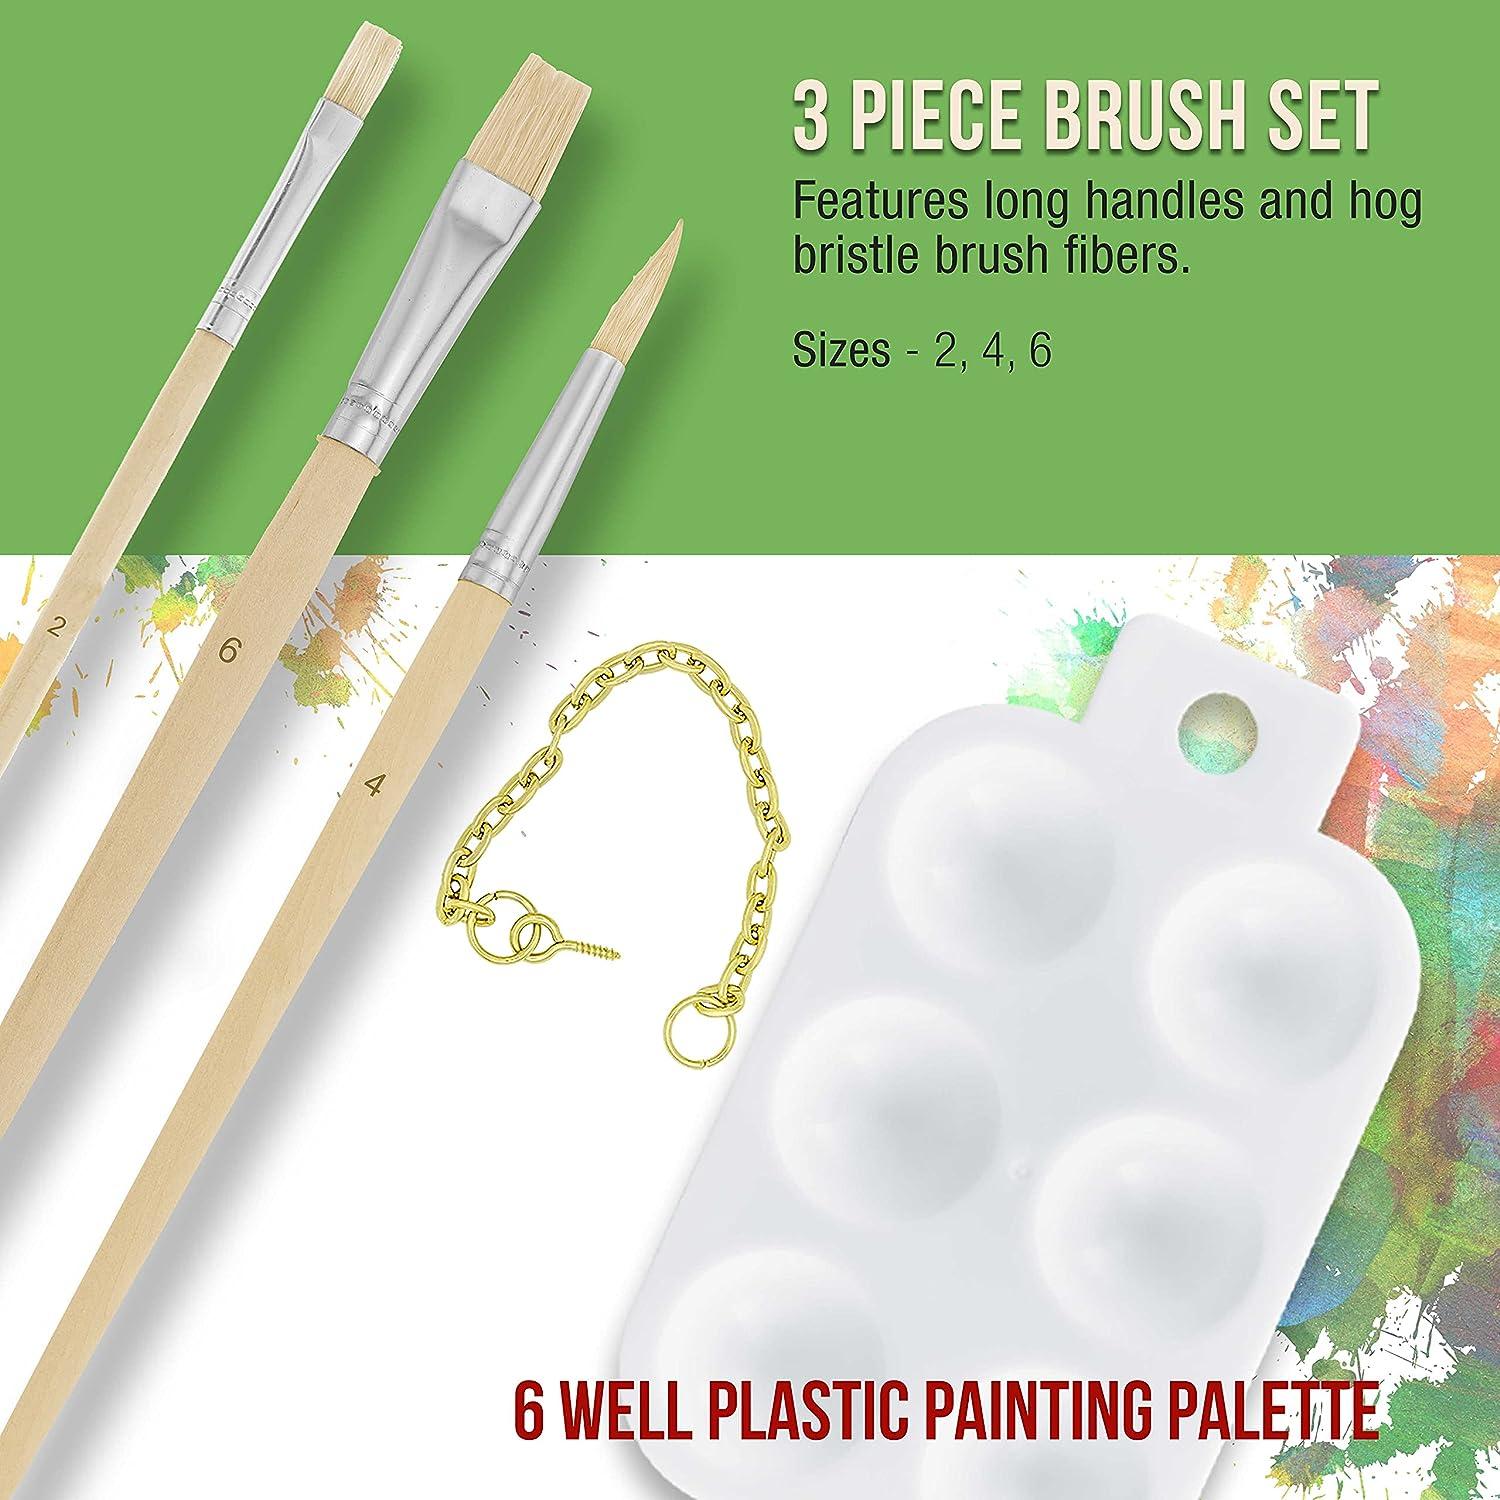 Painting Kit for Adults - 39 Piece Set Includes 24 Acrylic Paints, 3 Canvas, 6 Brushes, Wood Palette, Table Easel, Color Wheel, Spatula - Art Supplies